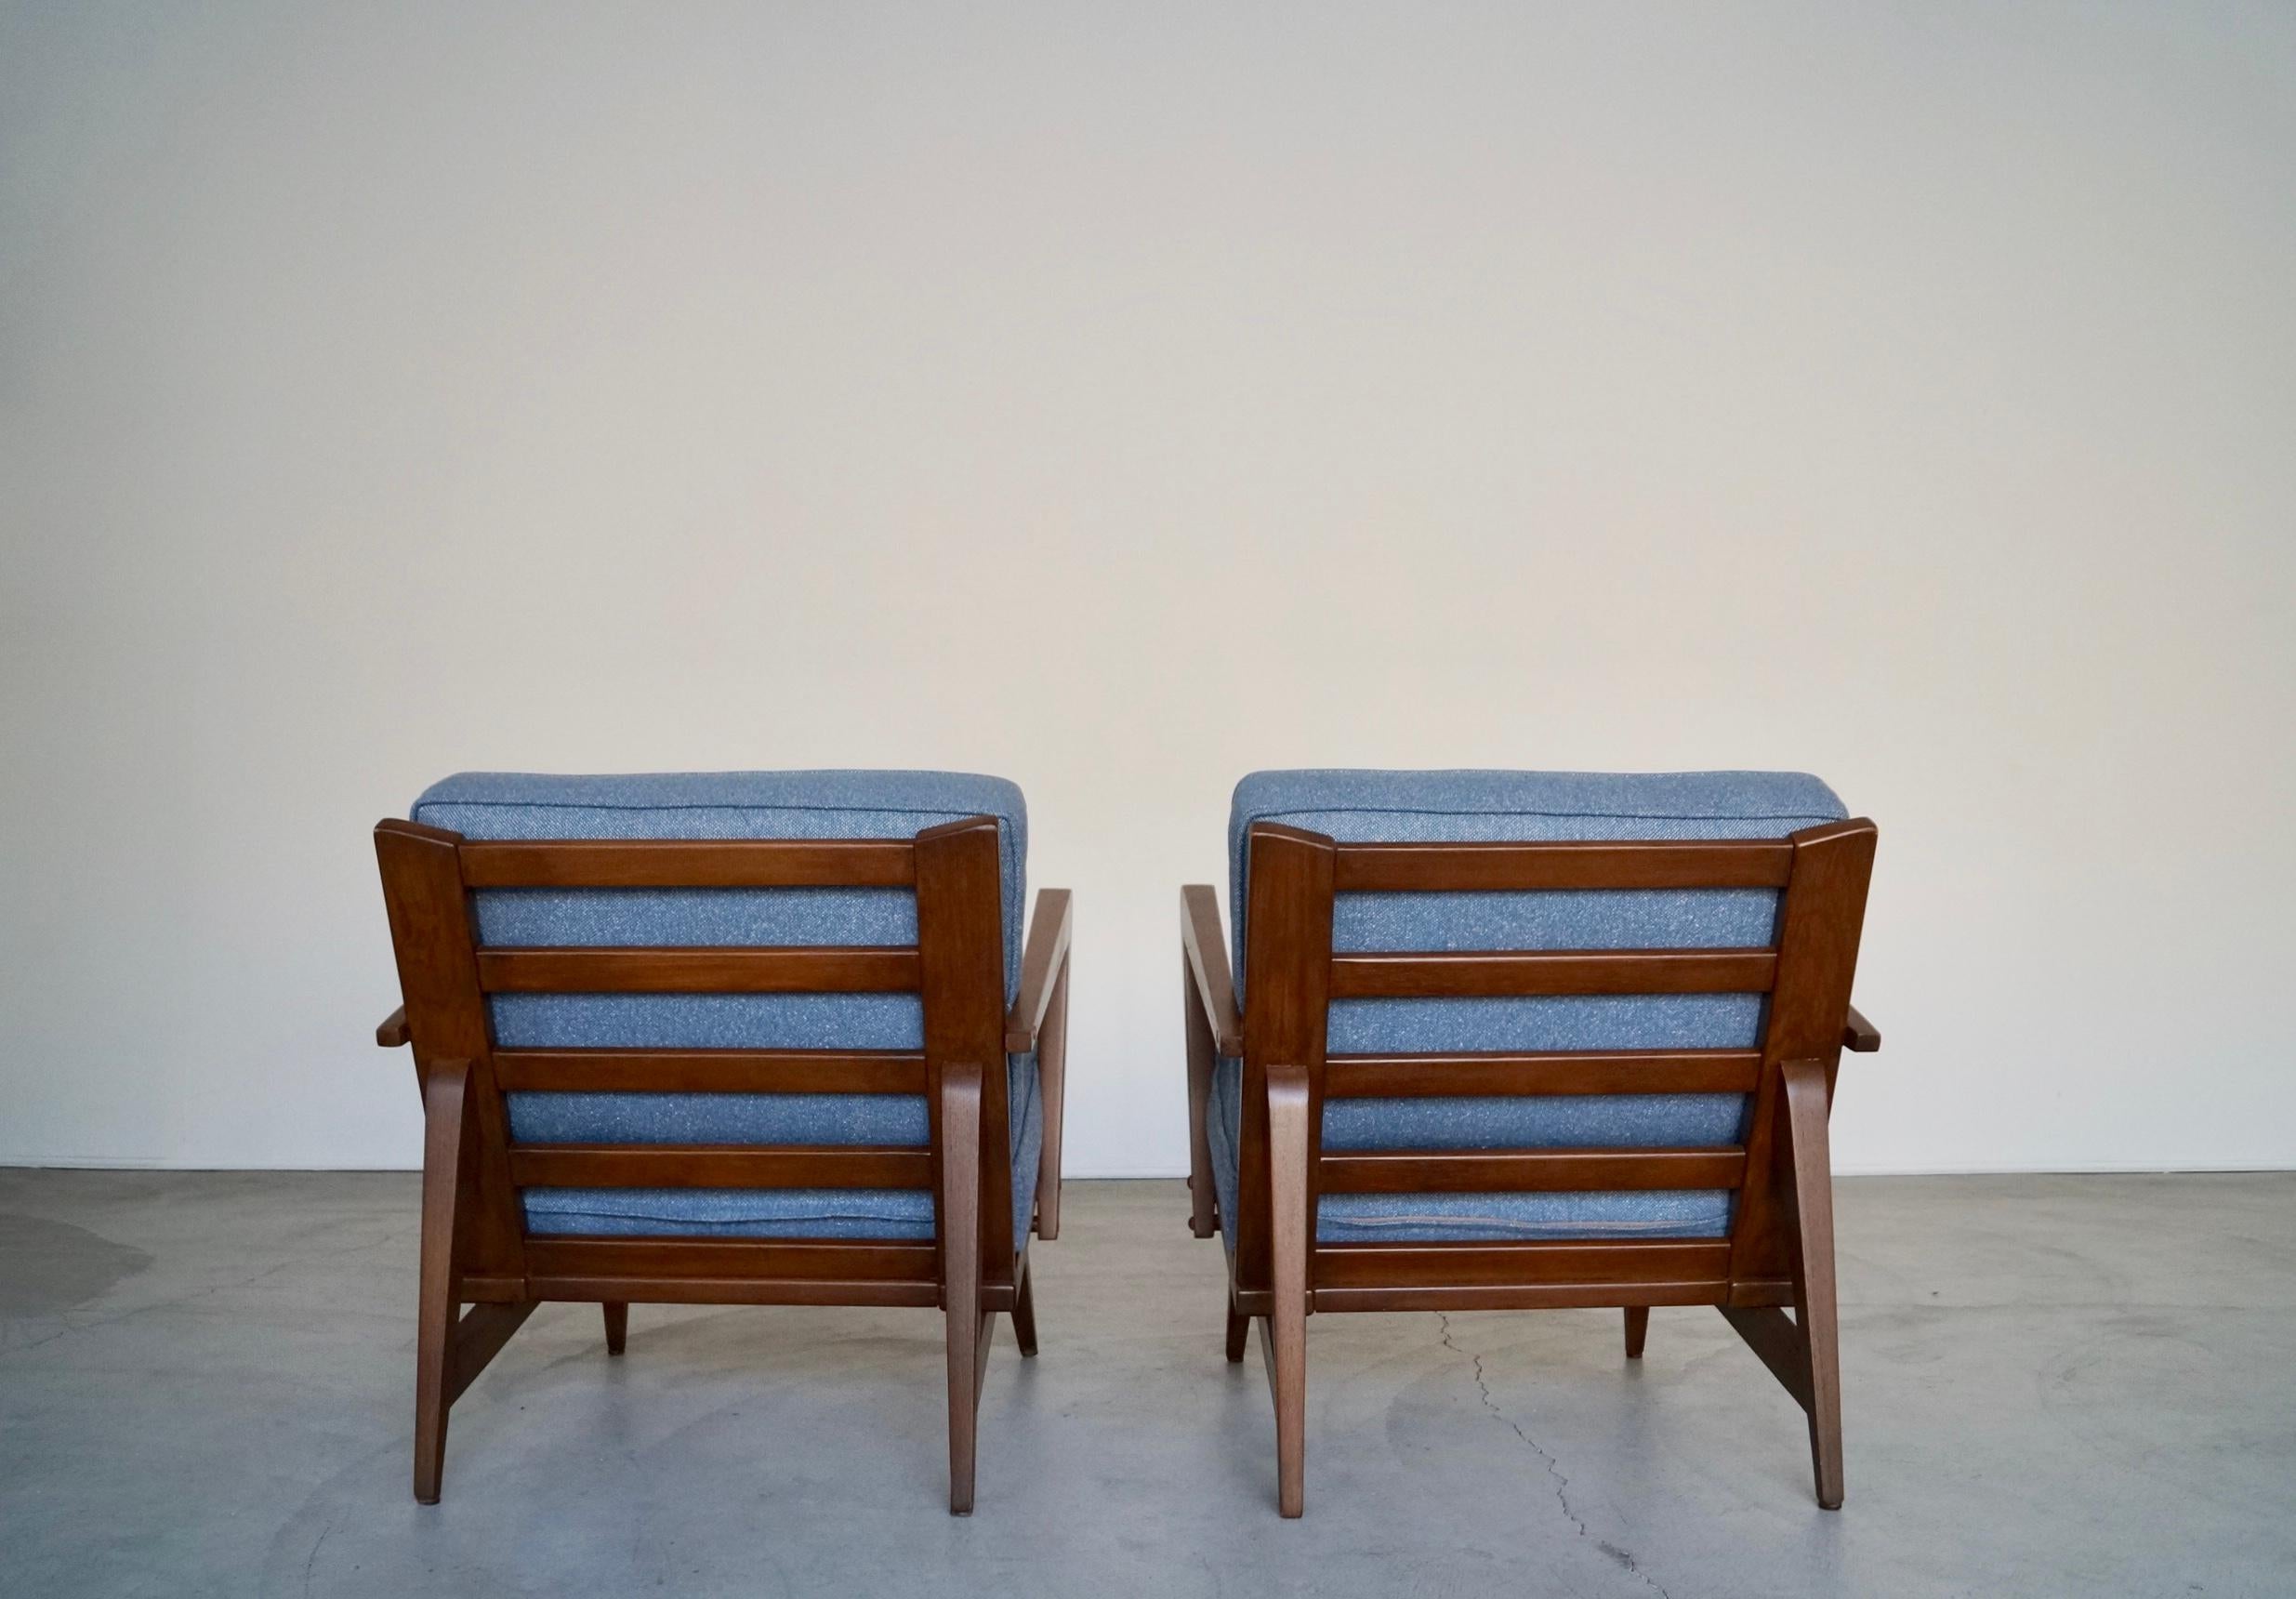 1950's Mid-Century Modern Lounge Chairs - a Pair 1